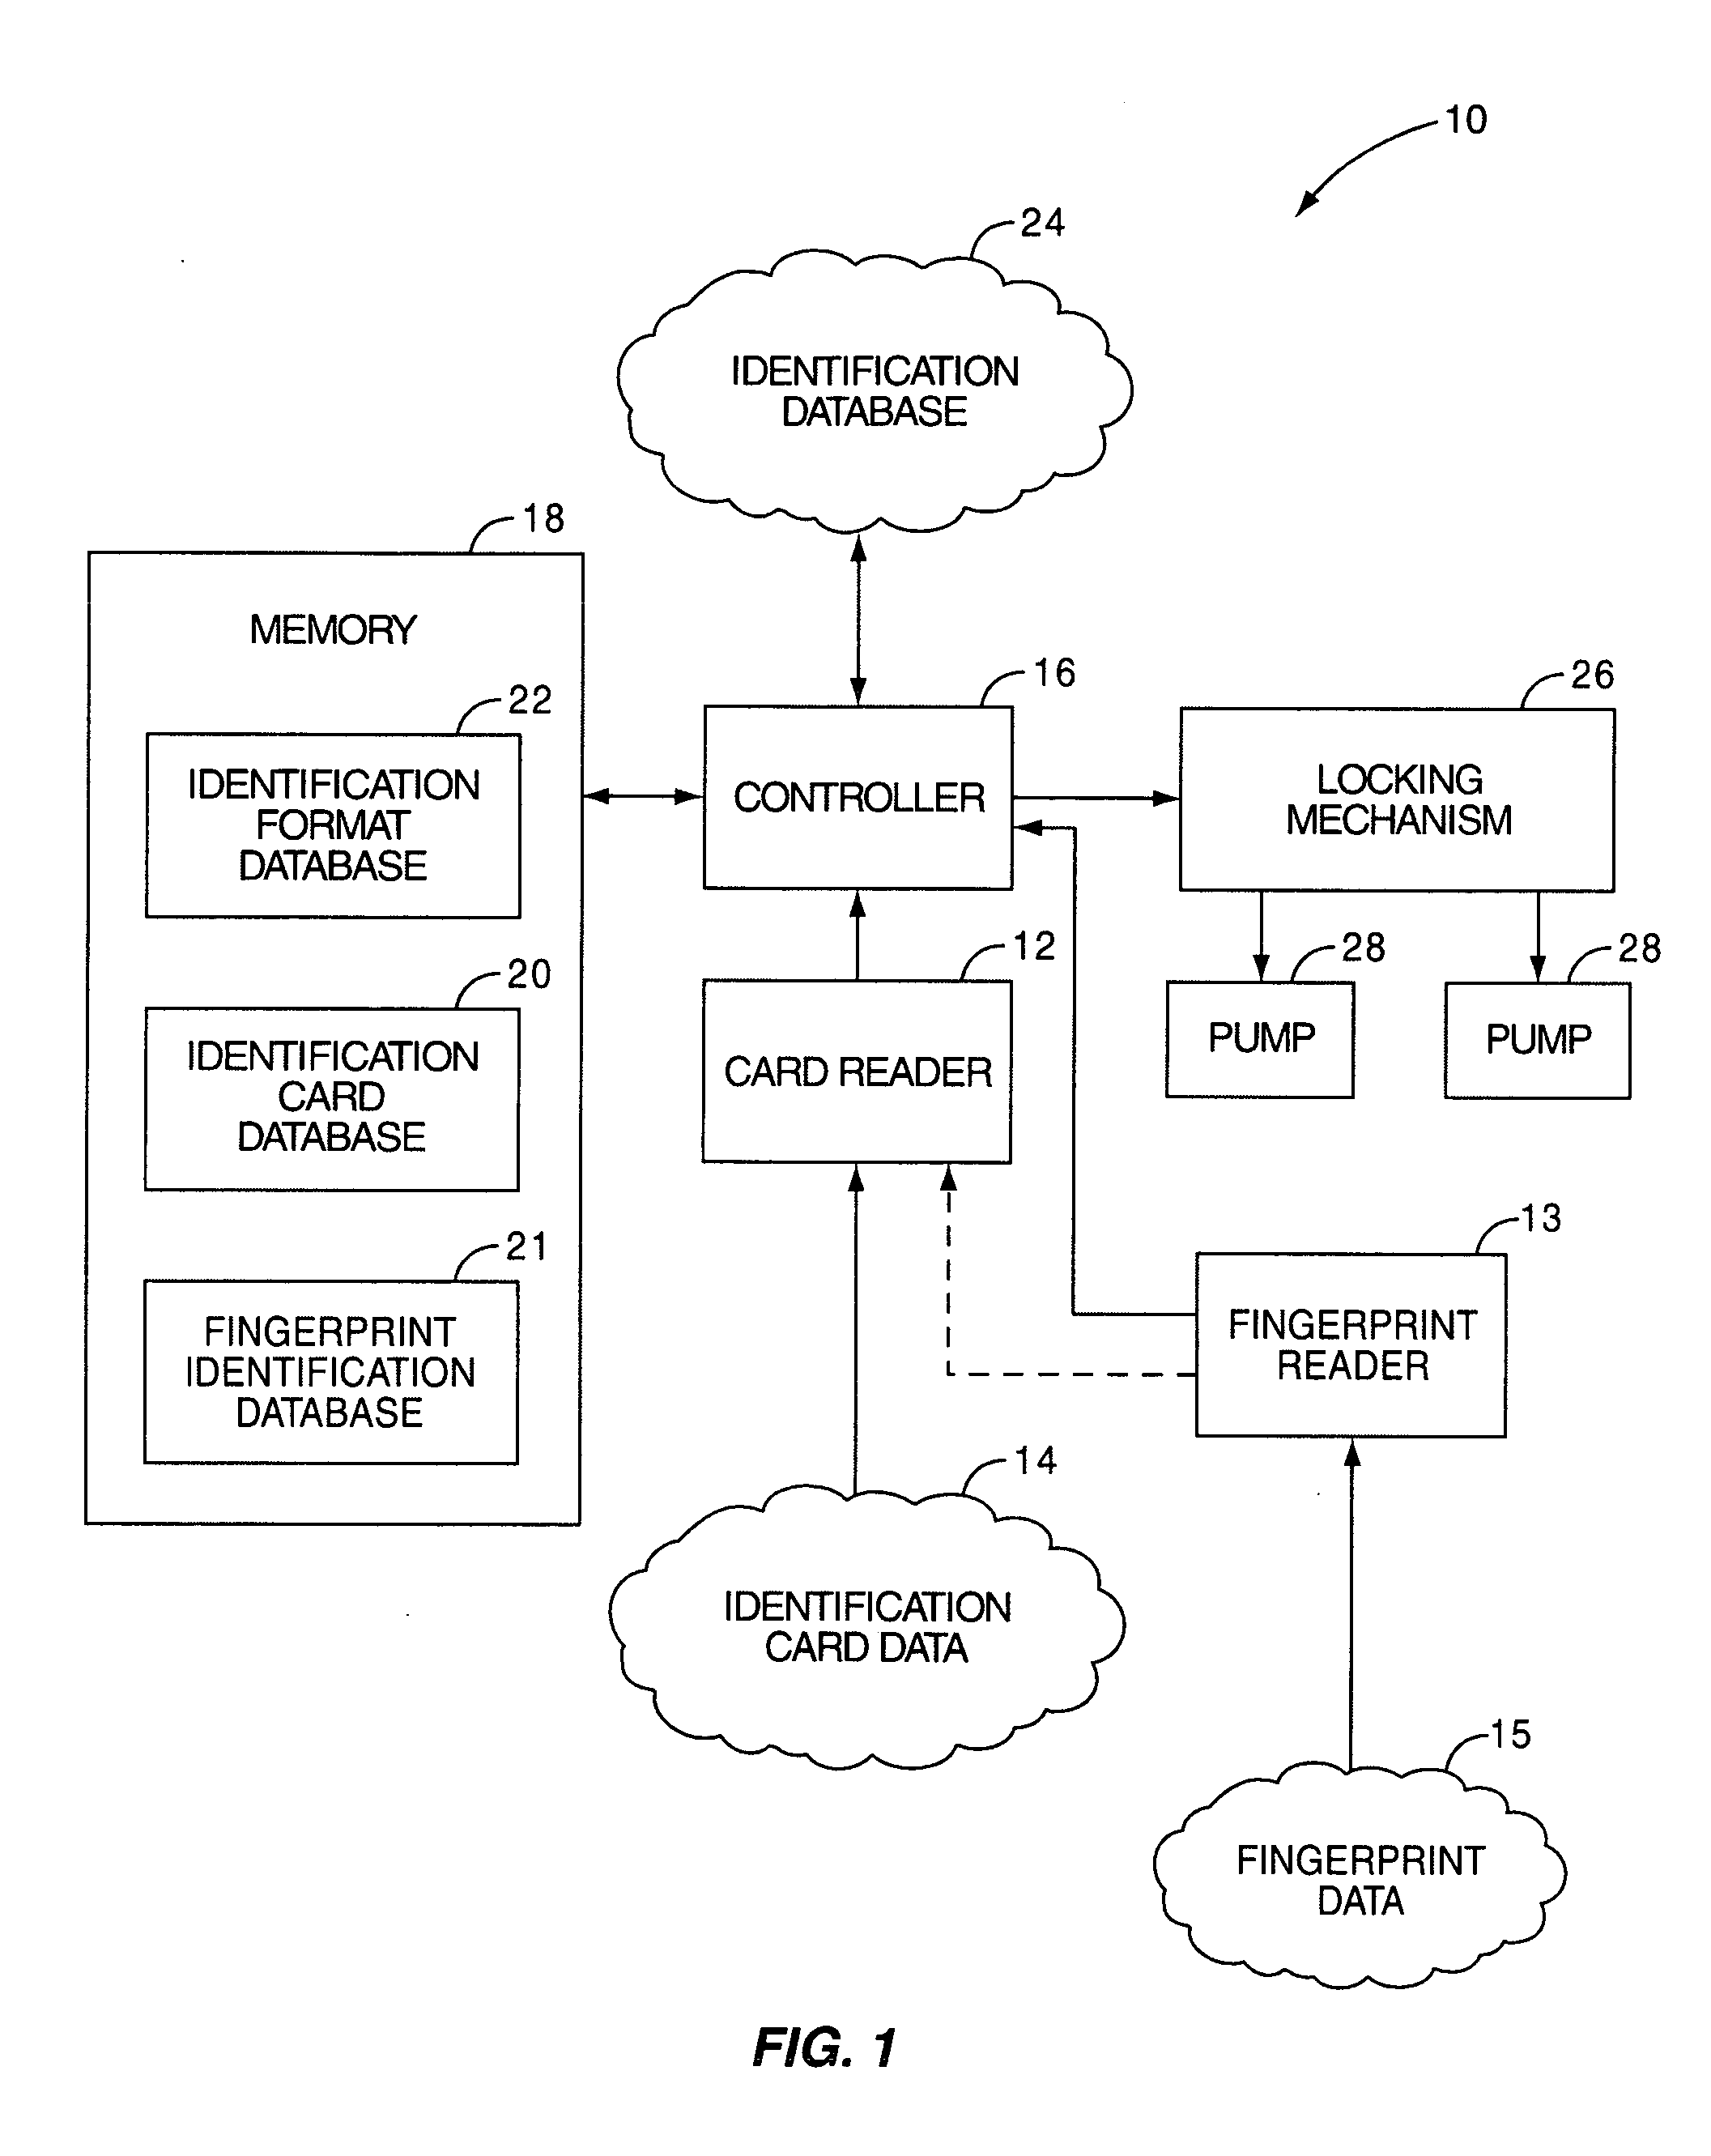 Security system and method for deterring, preventing, and/or tracking of theft of the use of goods and services, particularly fuel at retail fueling stations